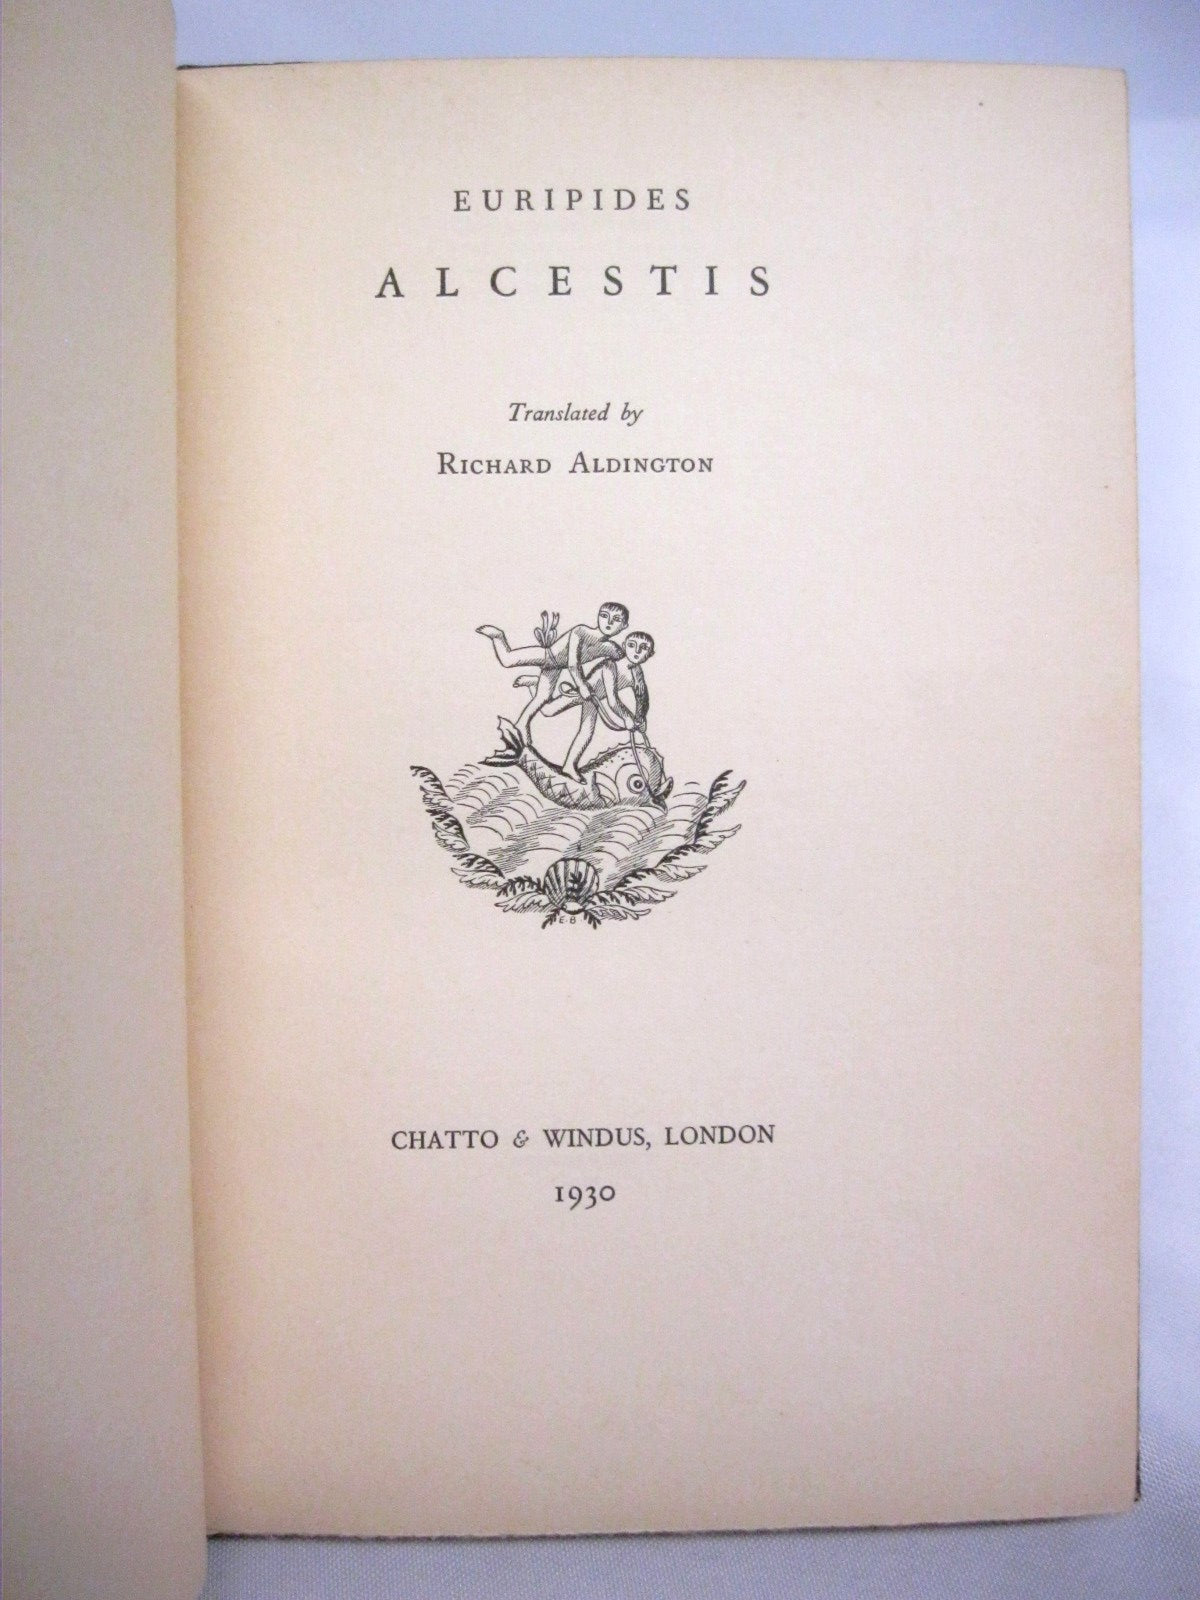 Alcestis by Euripides and translated by Richard Aldington